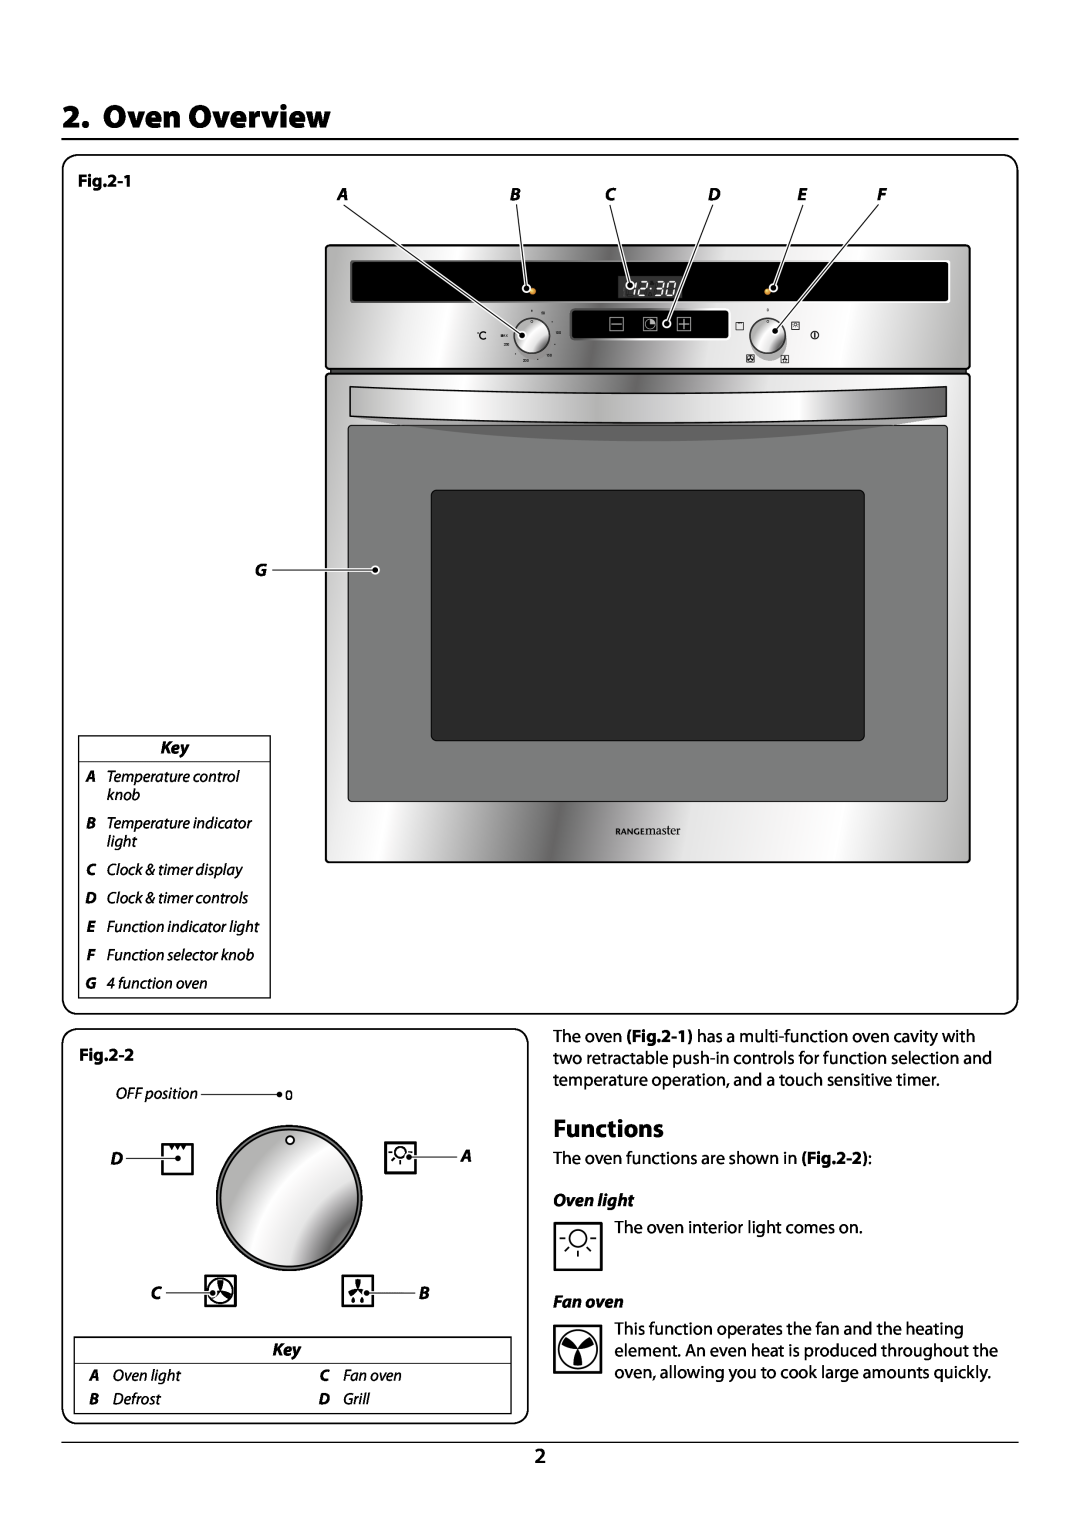 Rangemaster R604 Oven Overview, Functions, Oven light, Fan oven, This function operates the fan and the heating, Defrost 